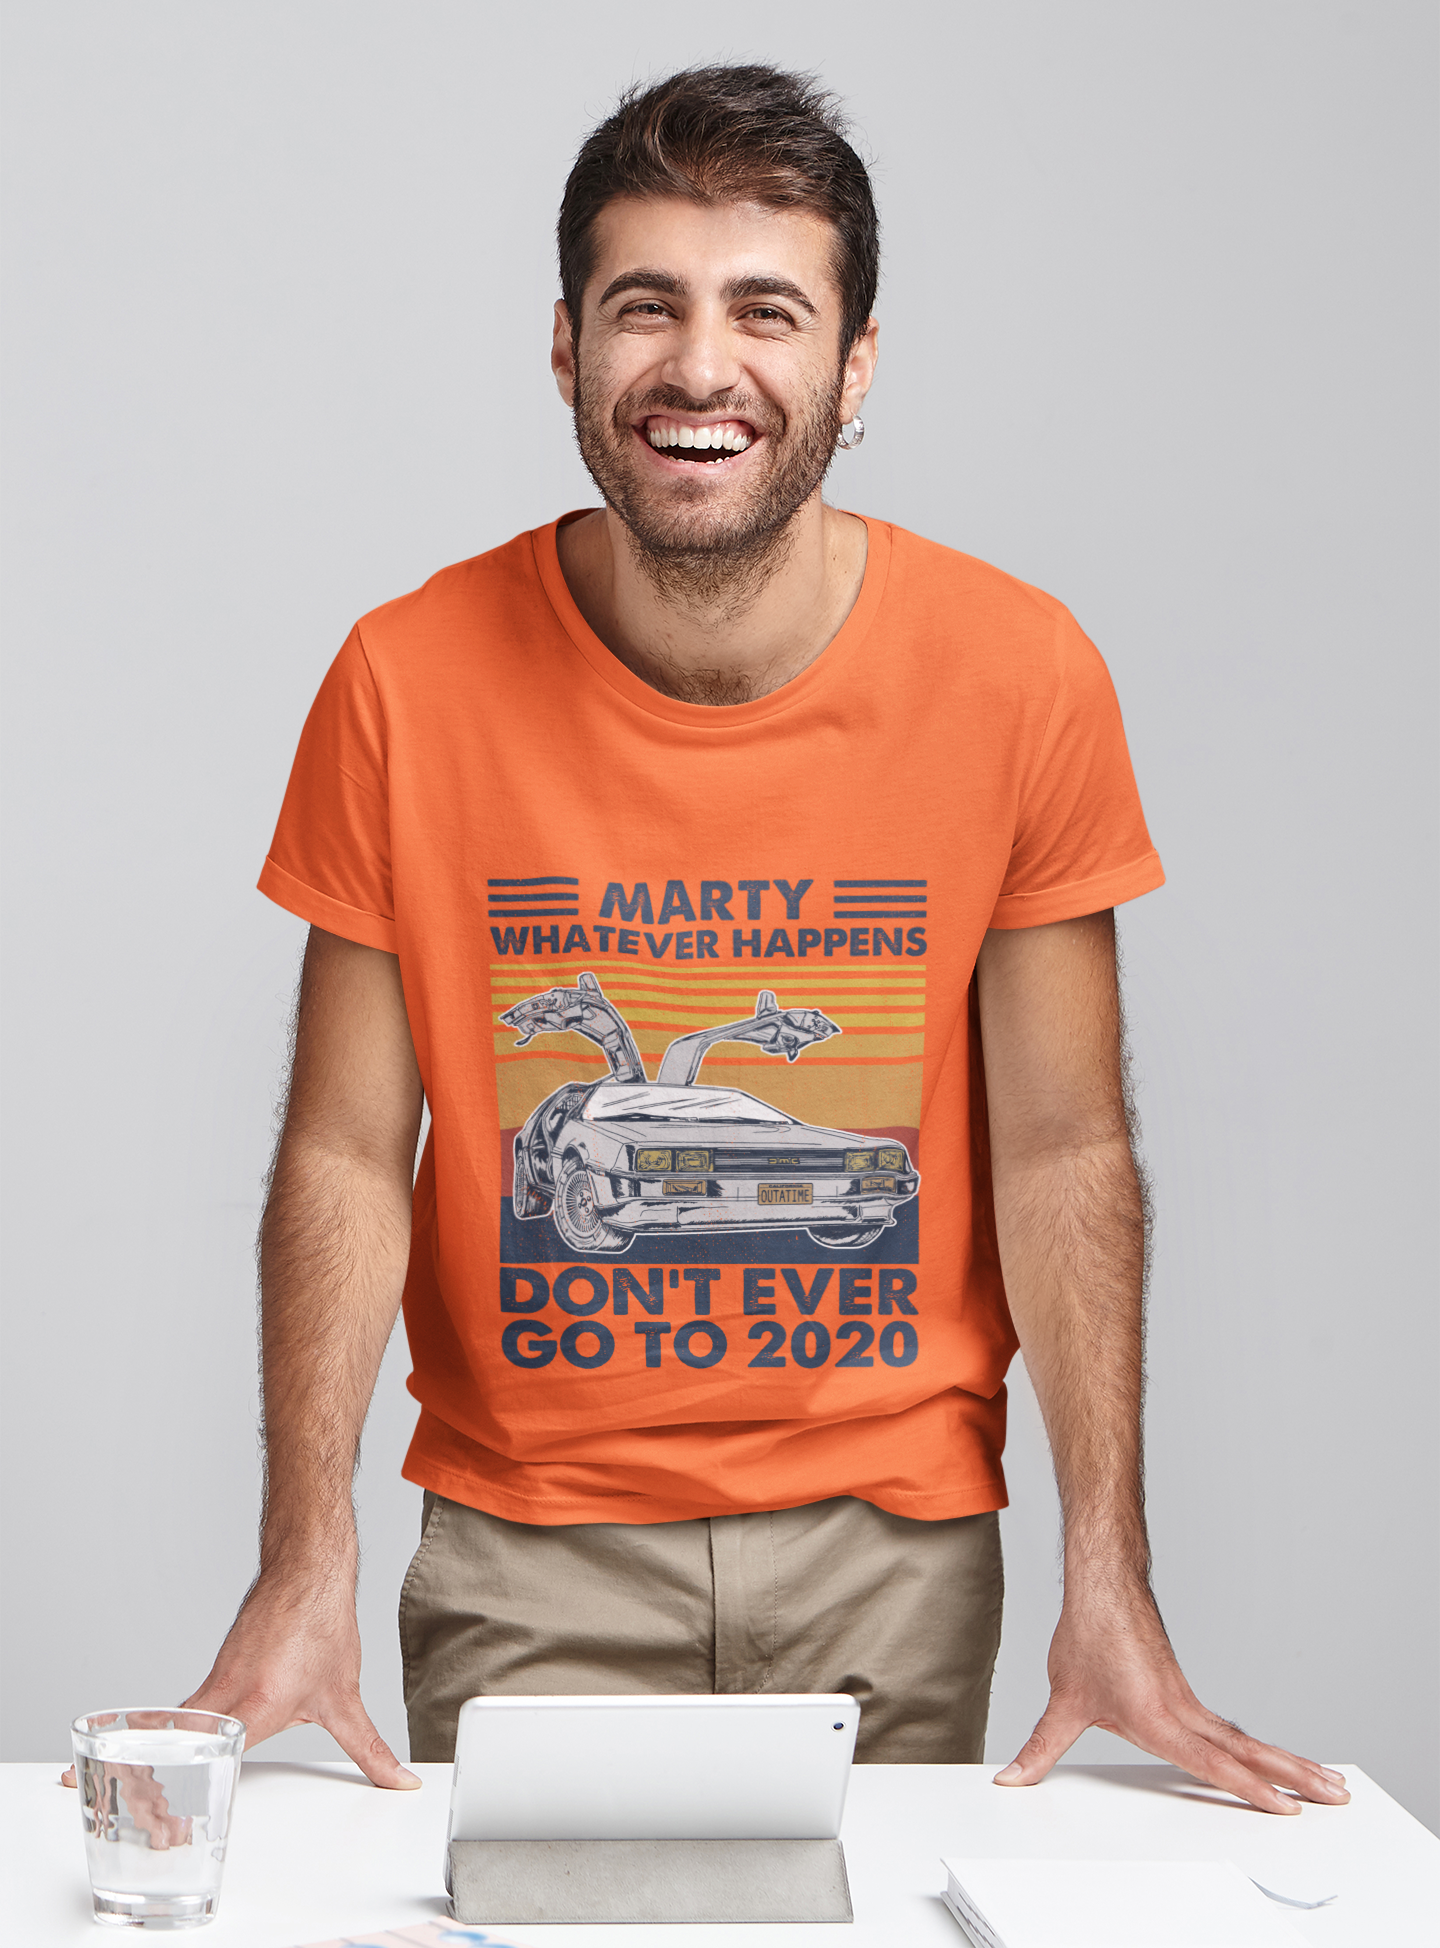 Back To The Future Vintage T Shirt, Marty Dont Ever Go To 2020 Tshirt, Delorean Time Machine T Shirt